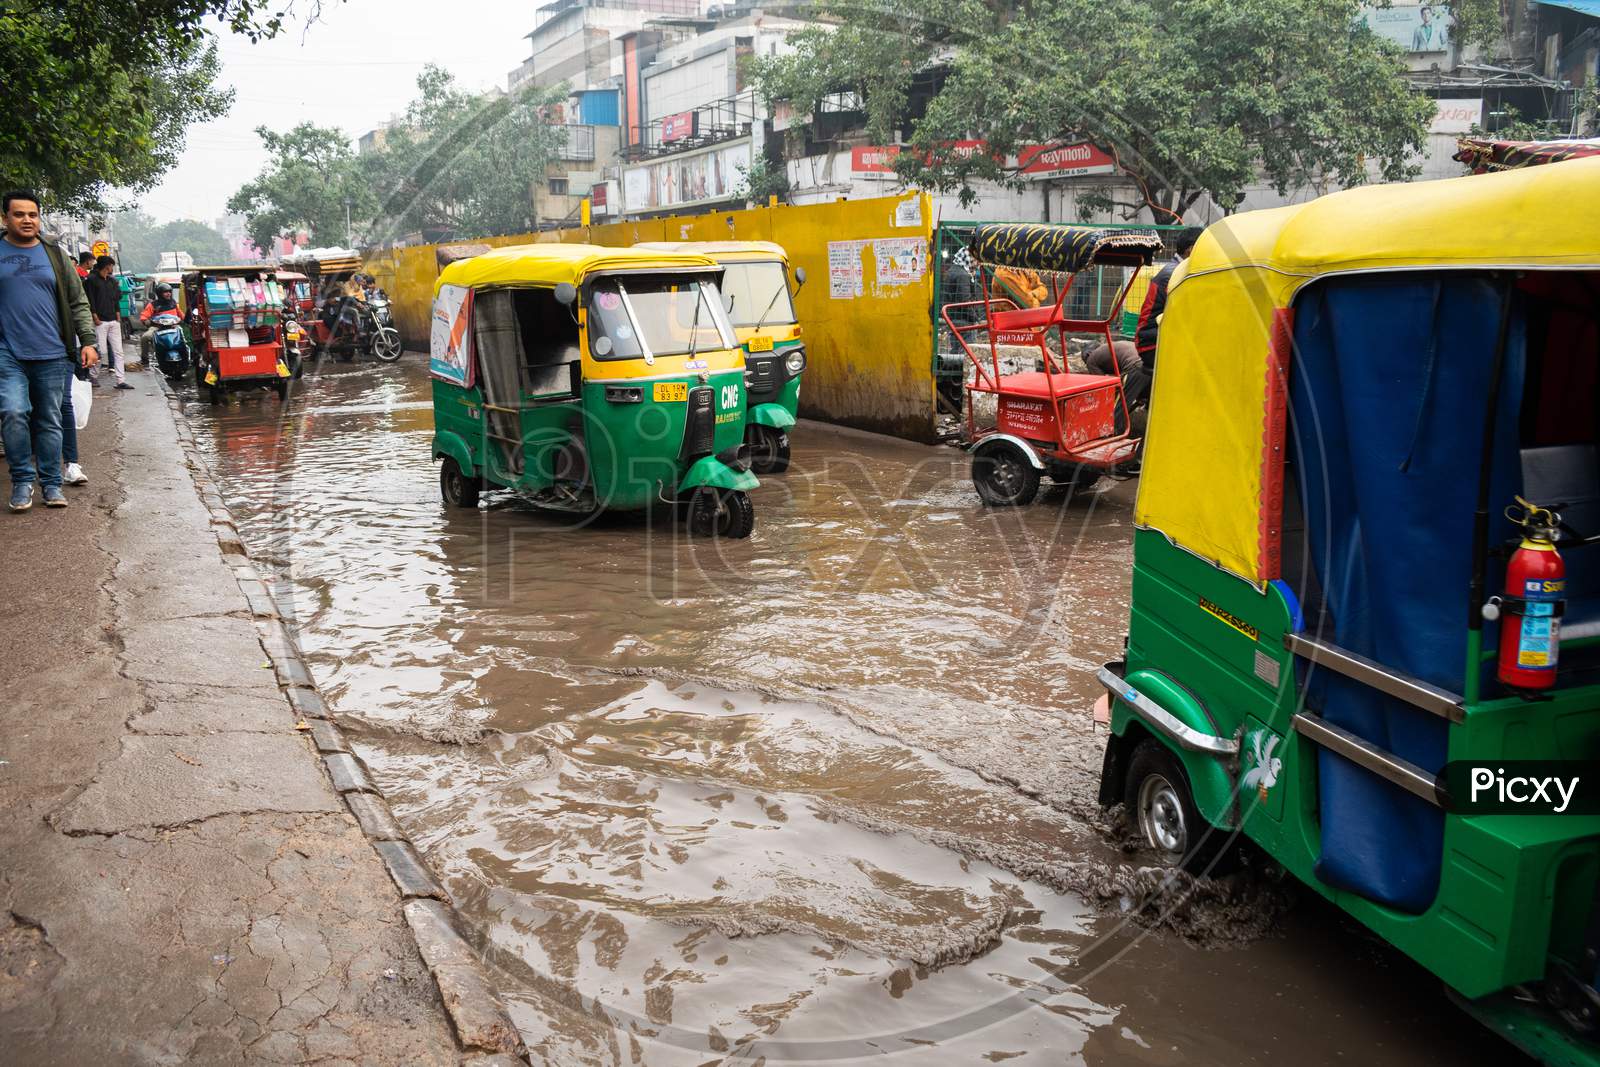 Auto rickshaws and other vehicles moving on the road filled with rain water